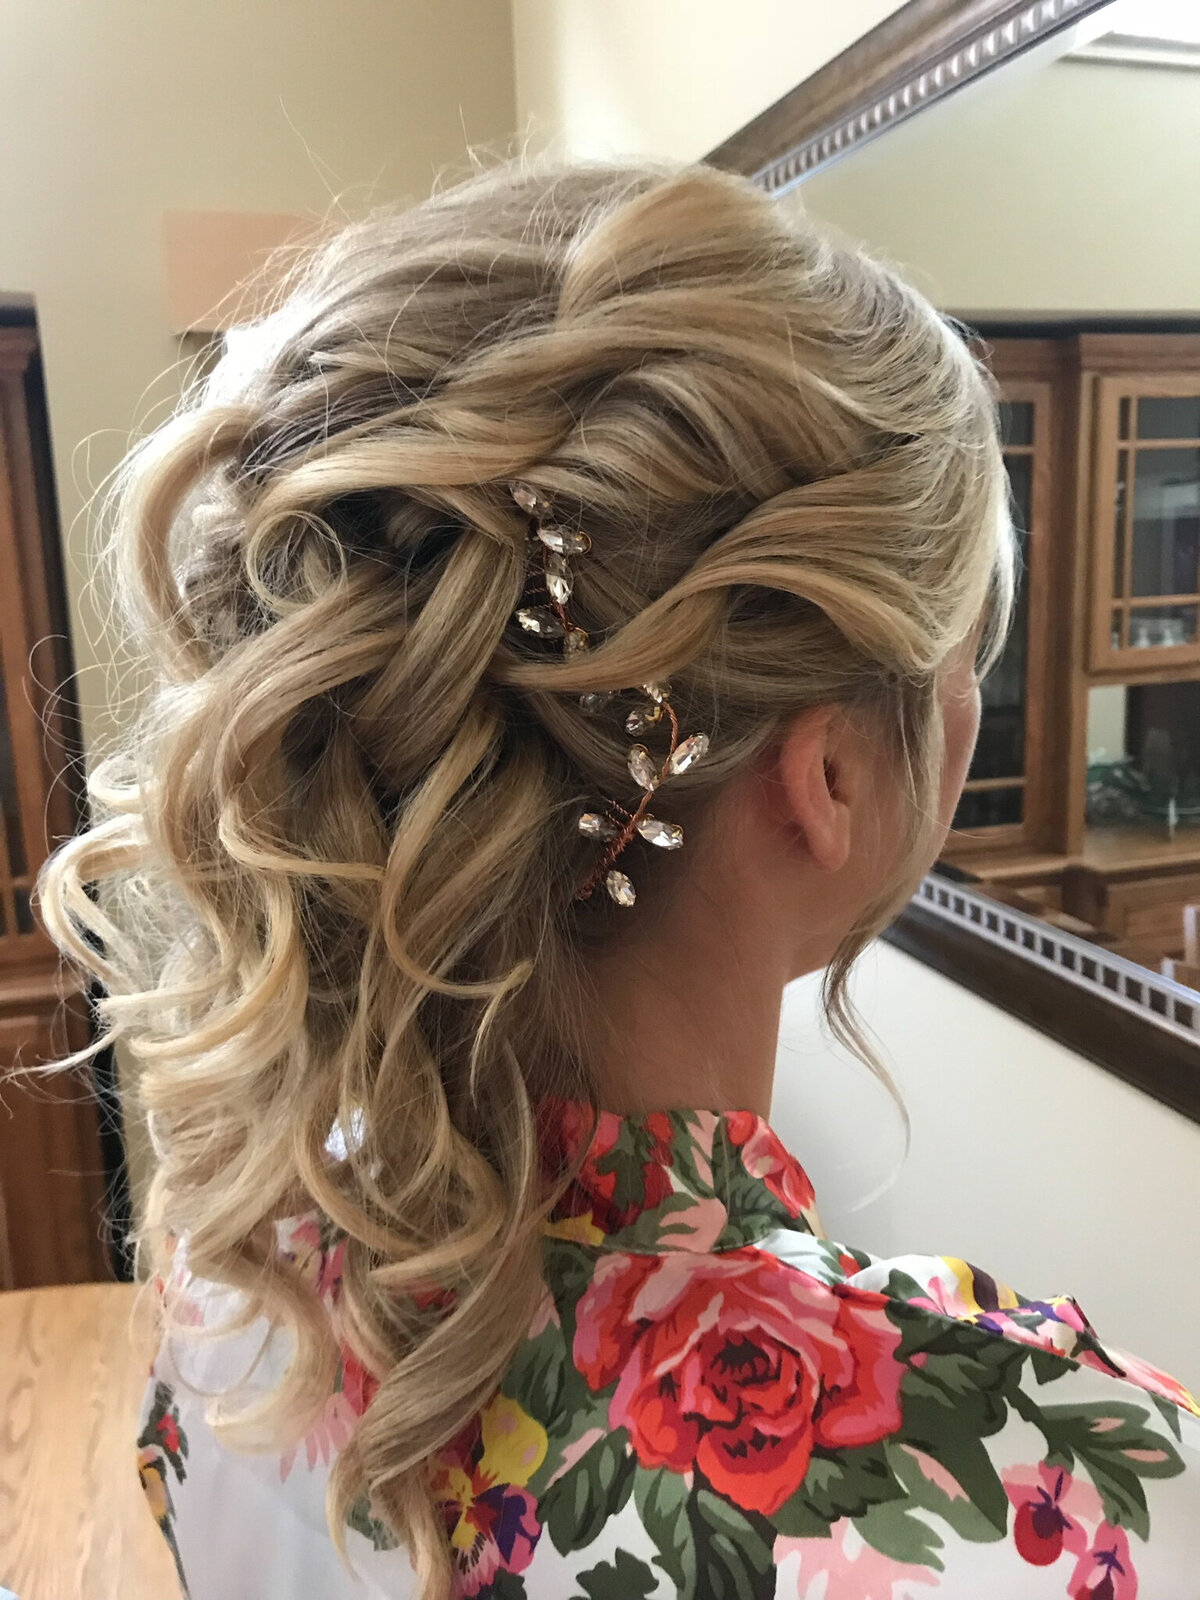 Classic bridal hair by Fox Hair, elegant and trusted Calgary, AB wedding hair stylist, featured on the Brontë Bride Vendor Guide.